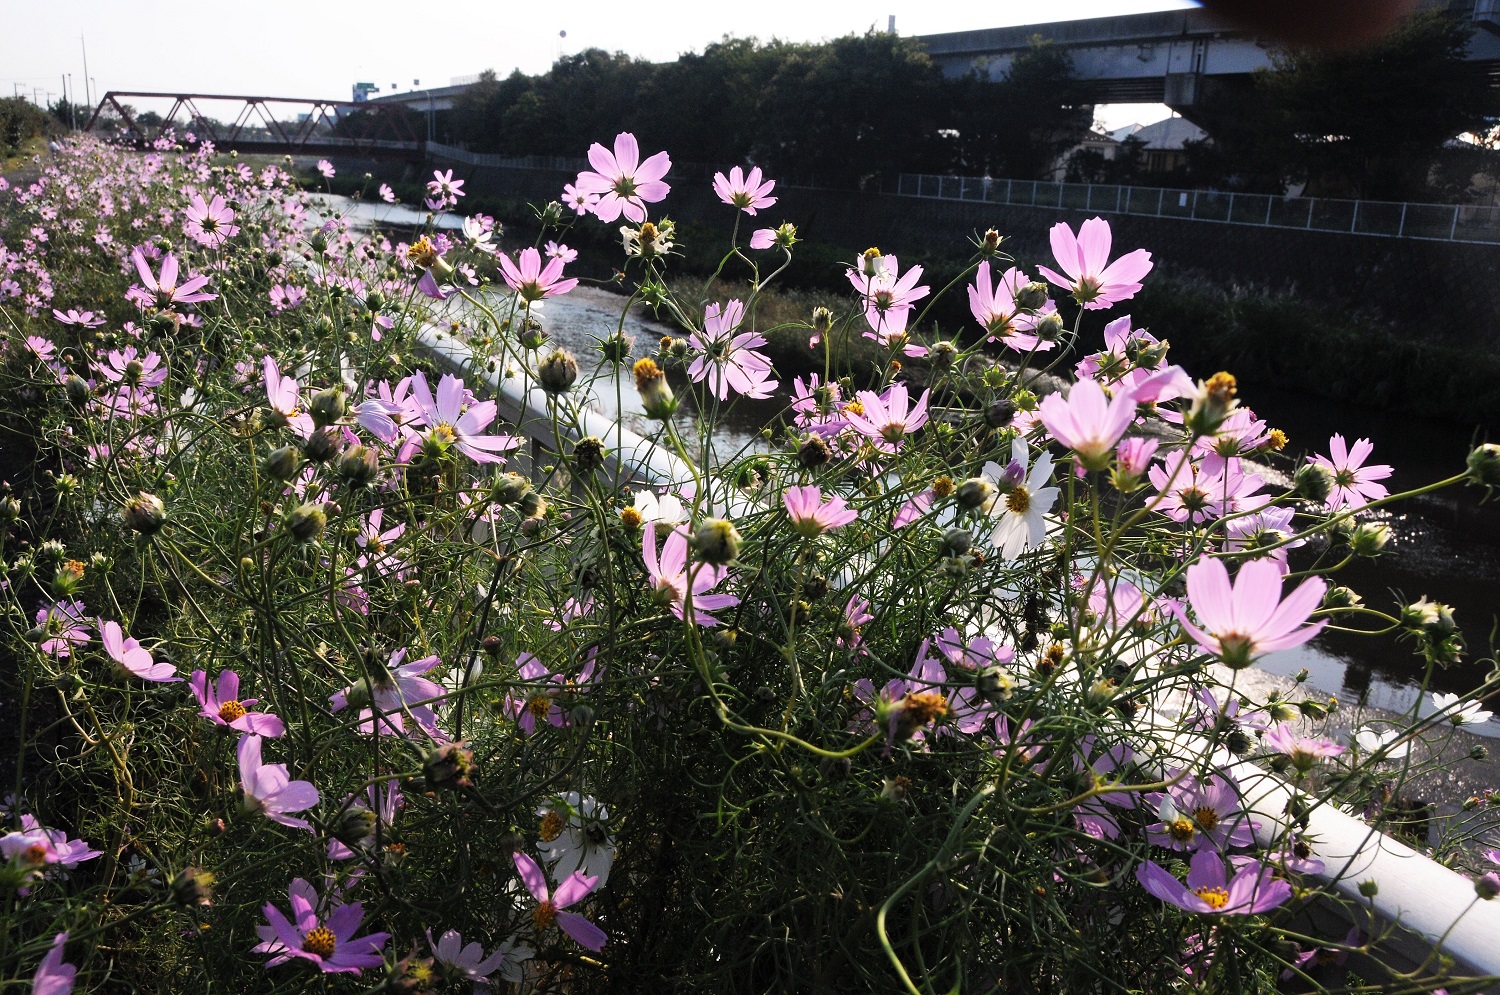 Cosmos on the Koide River